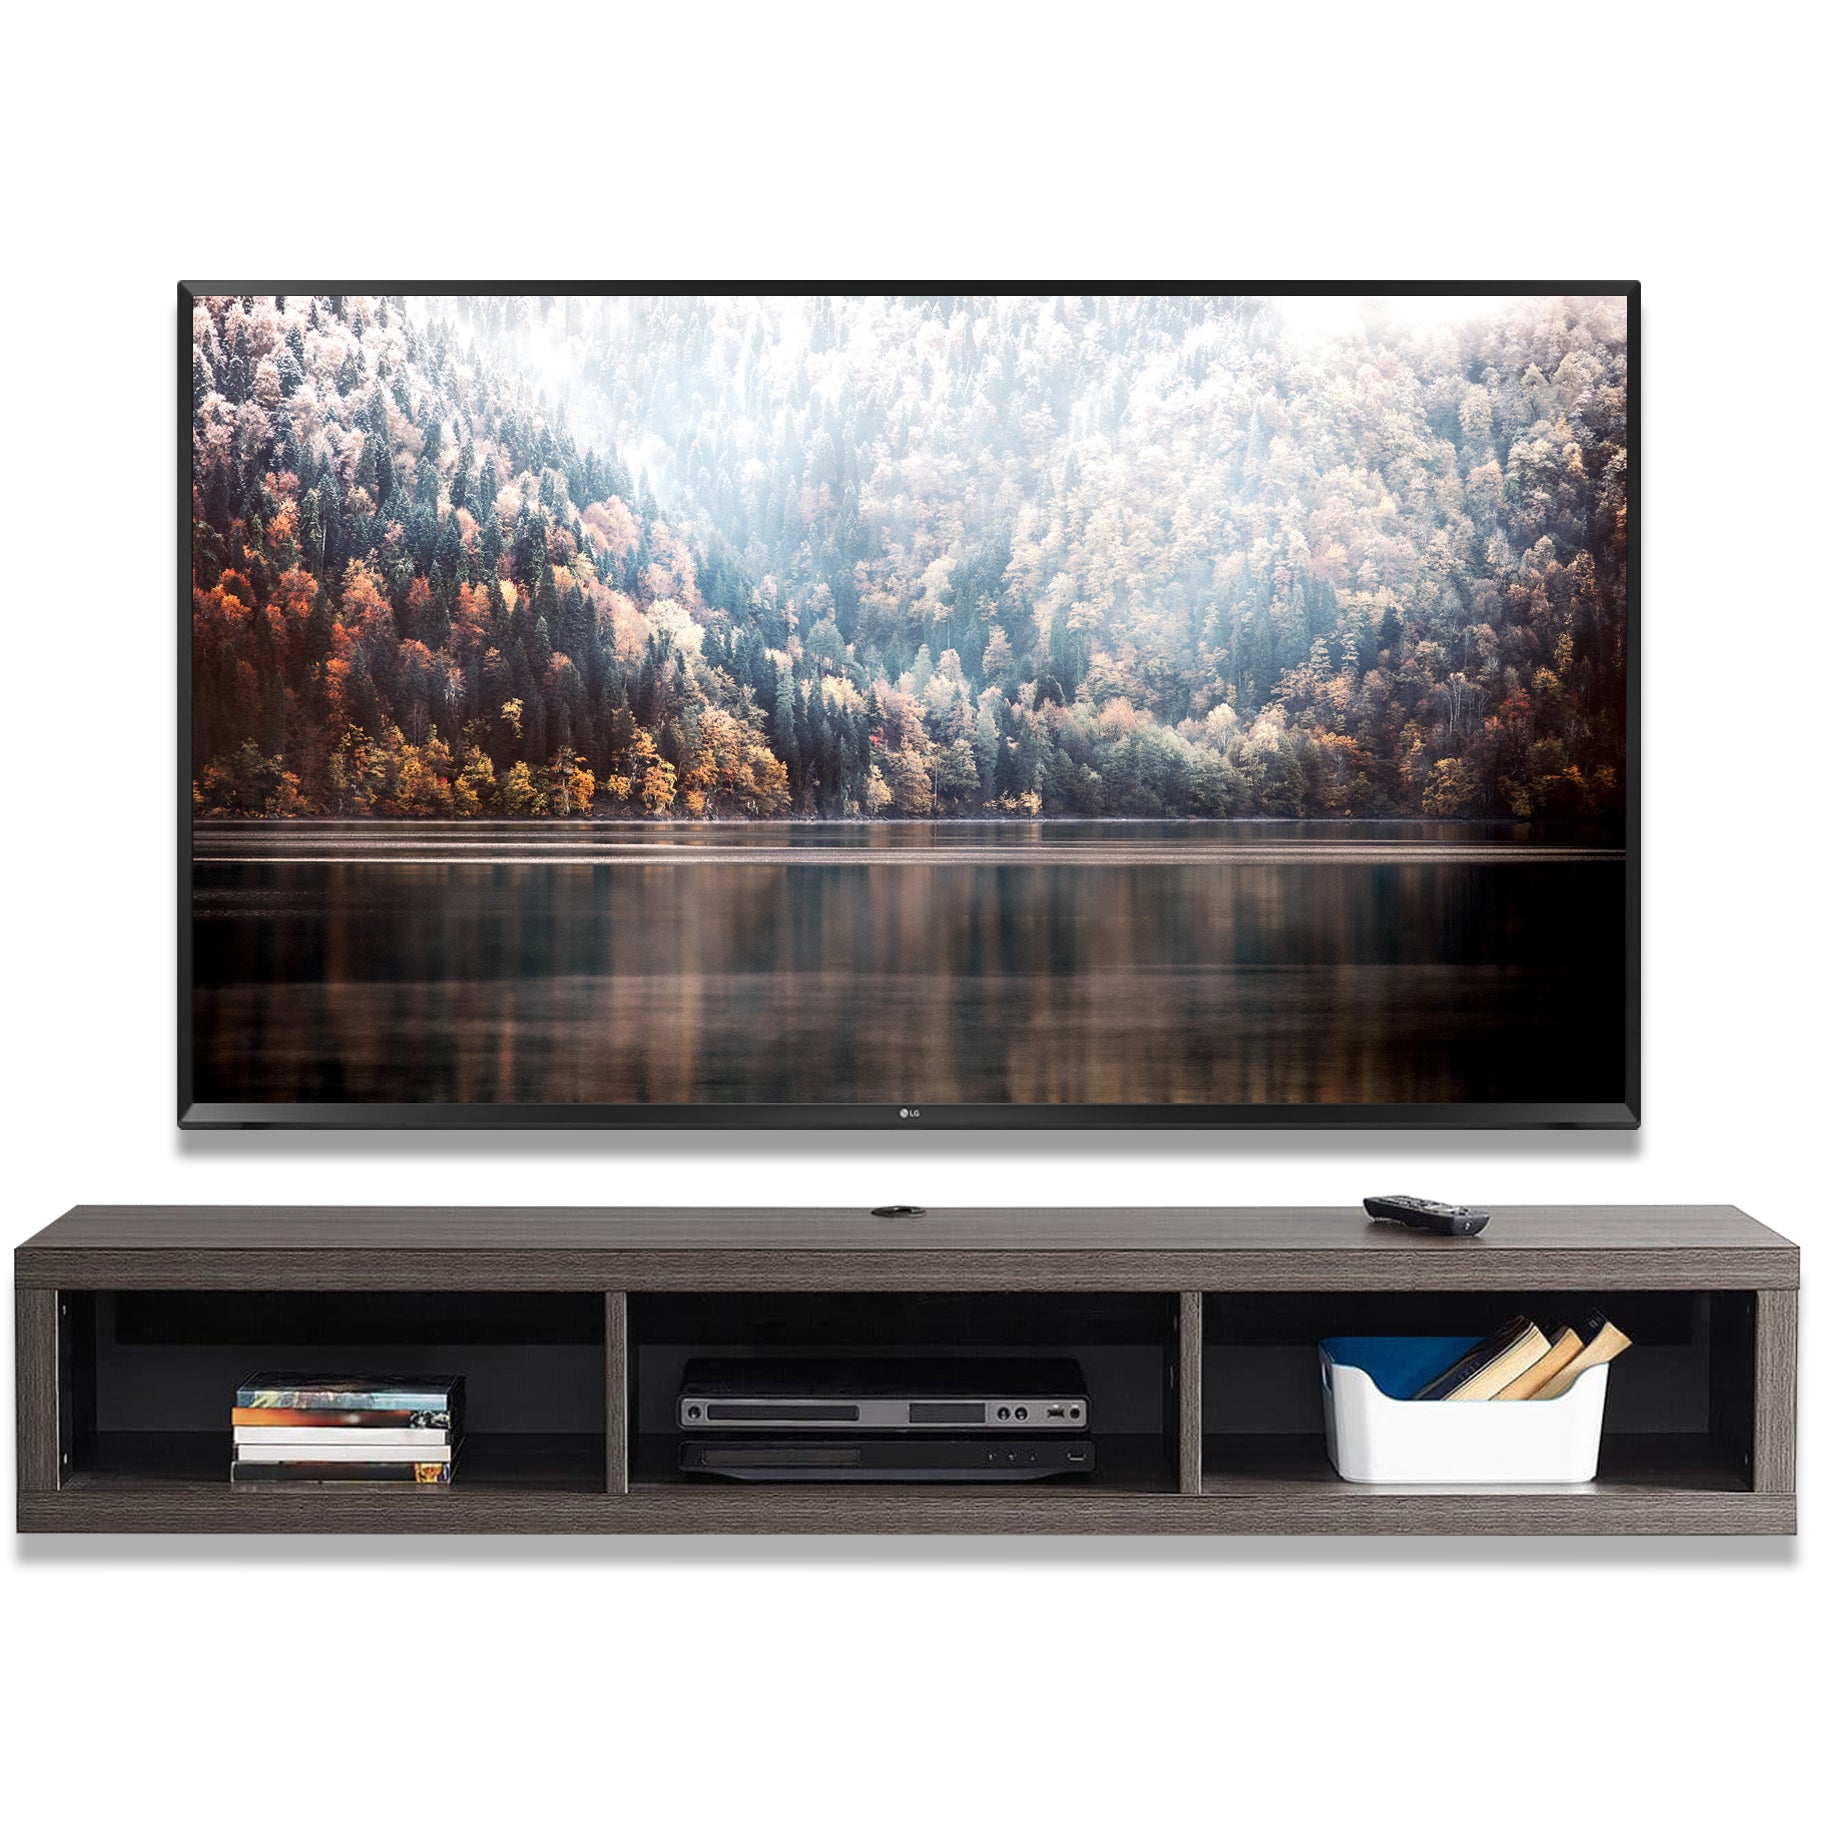 Floating Wall Mount TV Stand - Newport - Skyline Gray